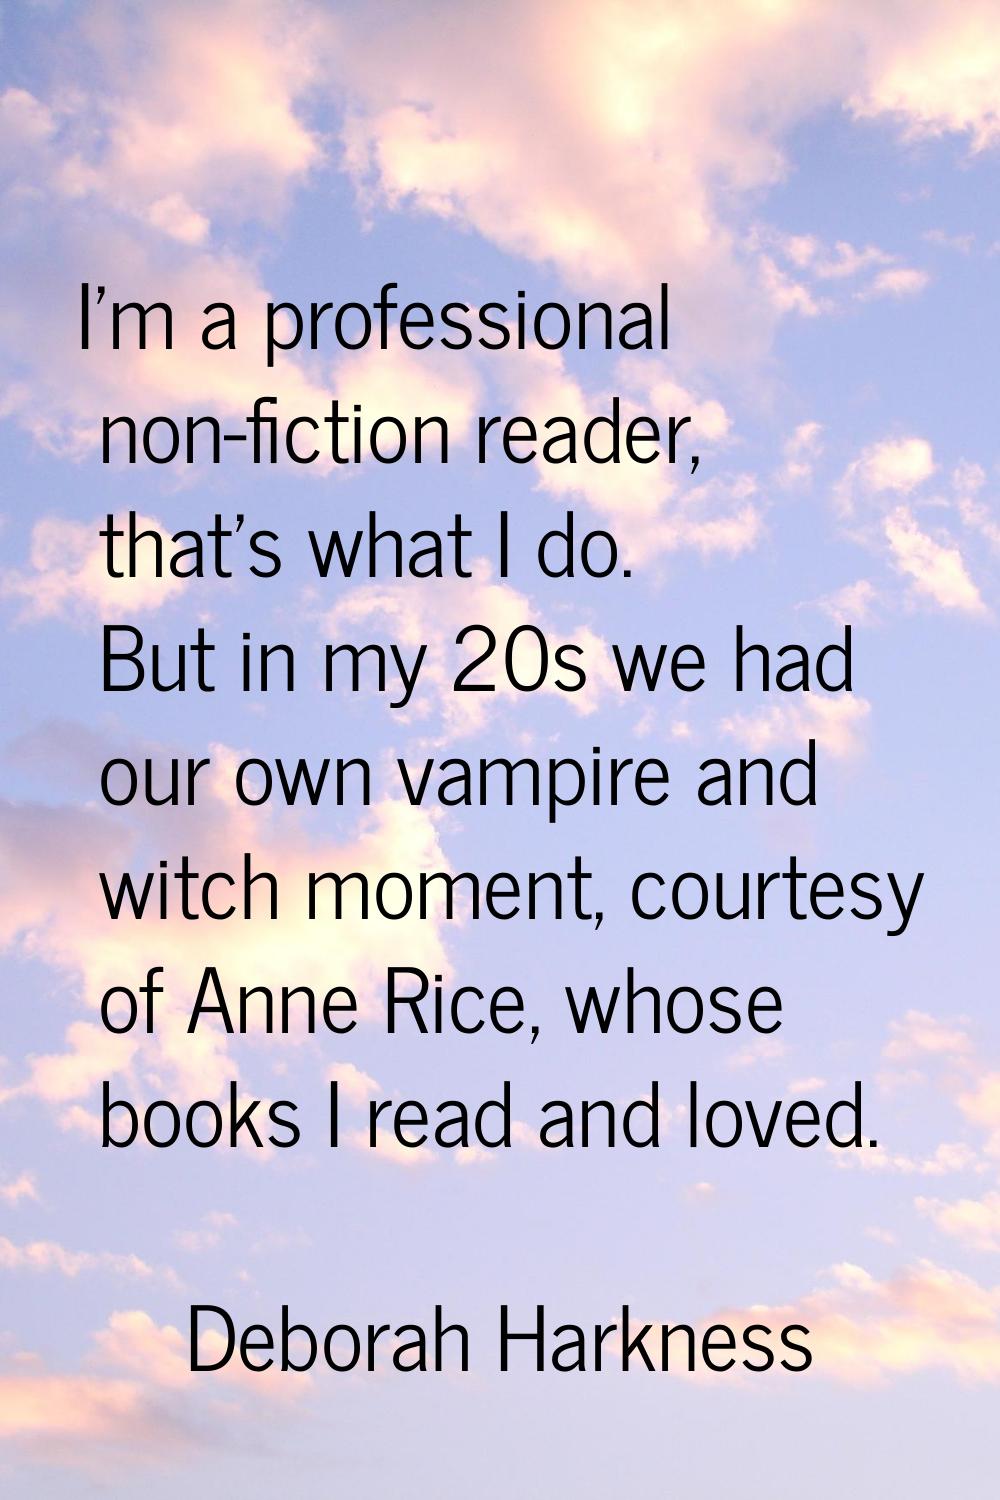 I'm a professional non-fiction reader, that's what I do. But in my 20s we had our own vampire and w